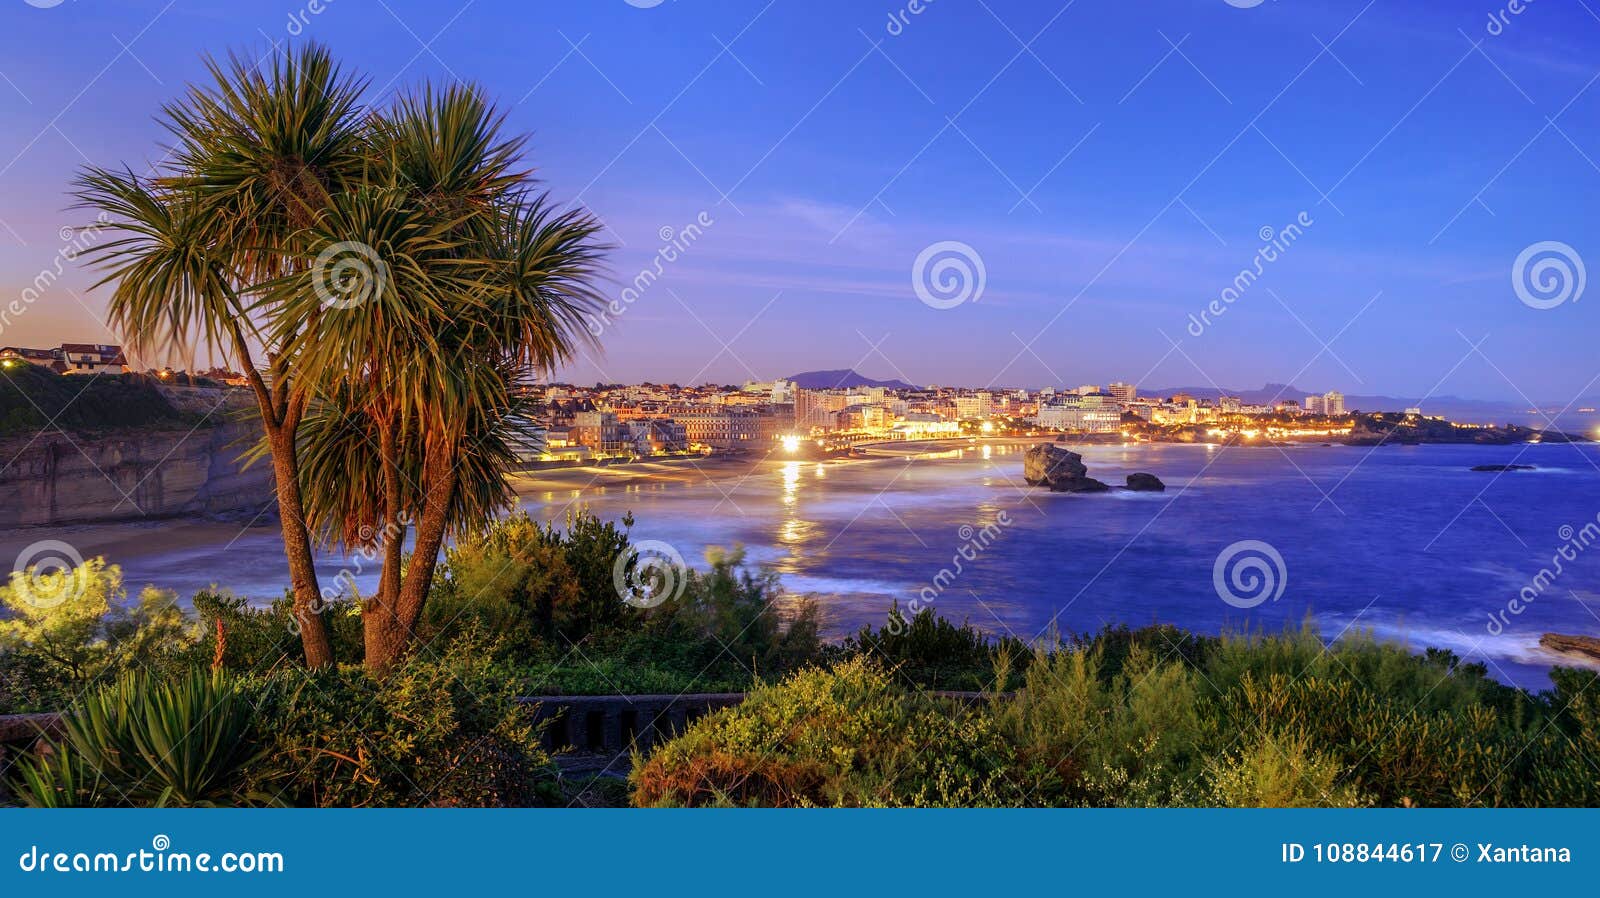 biarritz city and bay of biscay on late evening, france